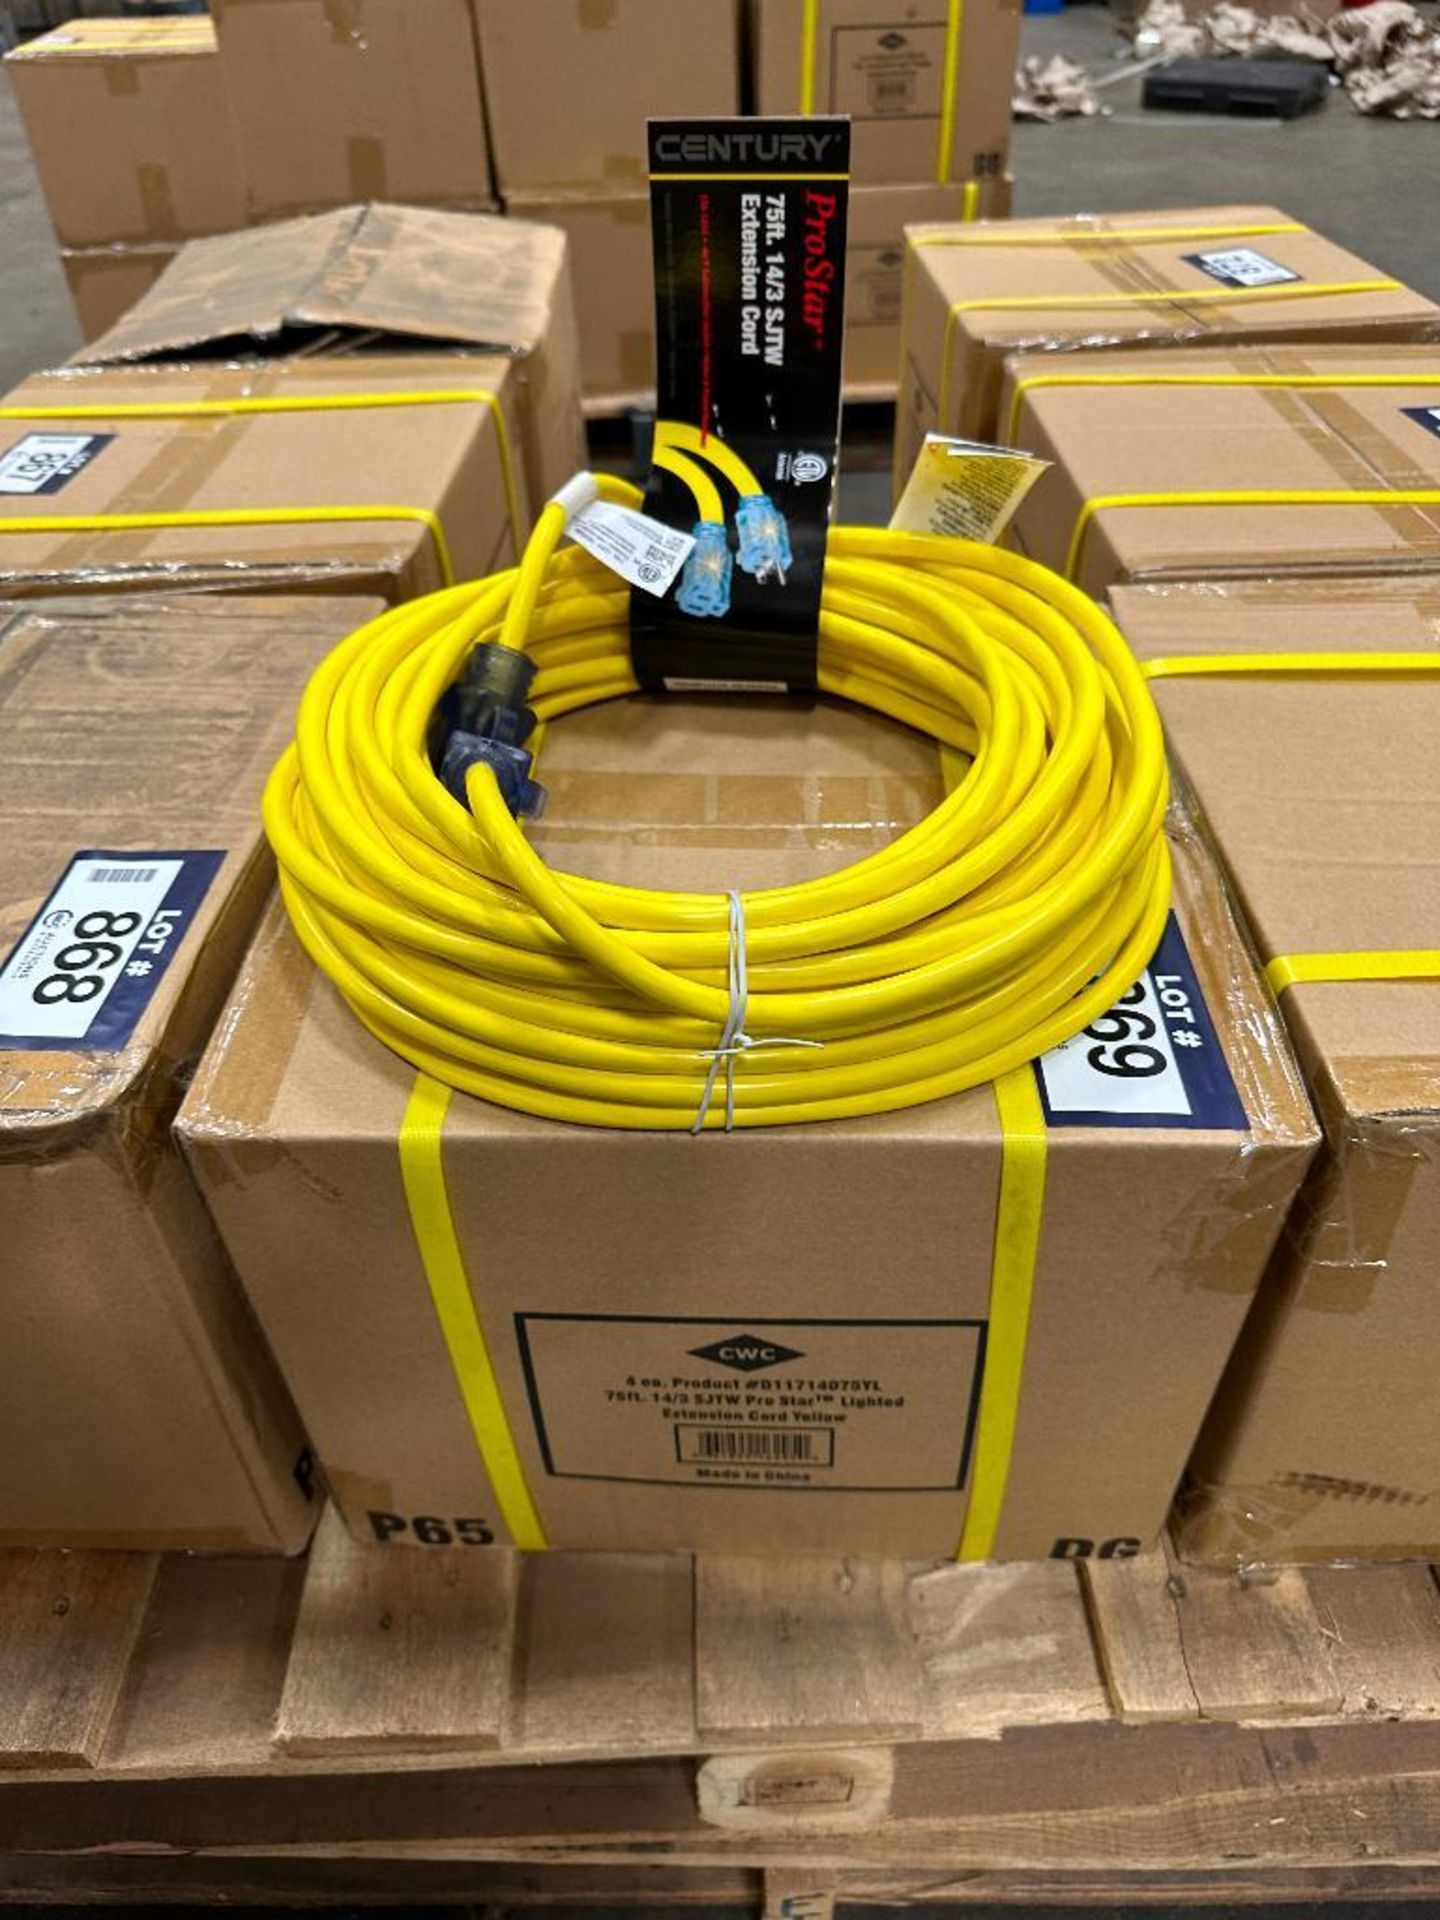 Box of (4) 75' 14/3 Pro Star Lighted Extension Cords